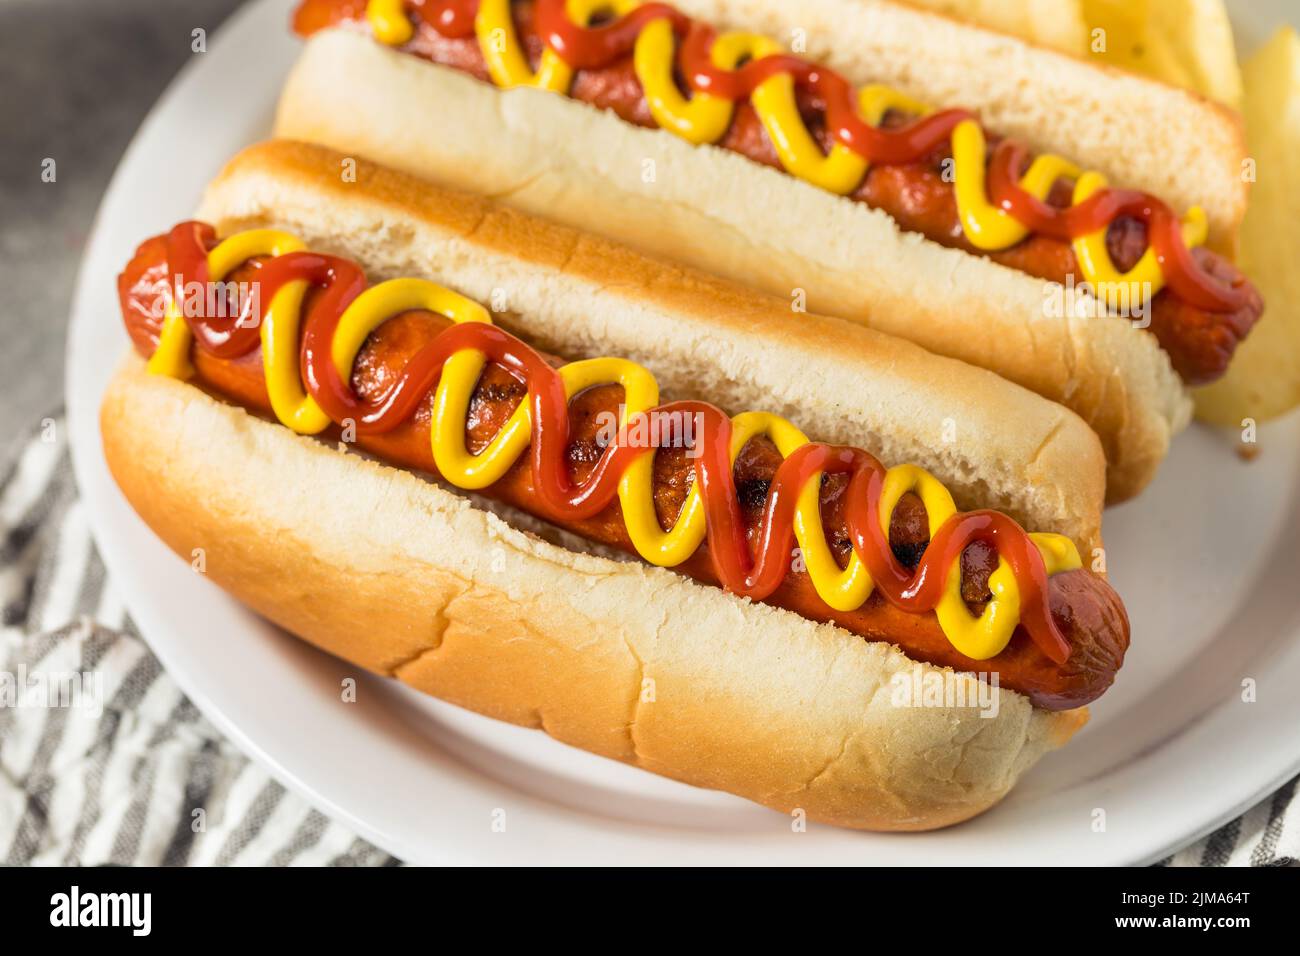 Homemade Hot Dog with Ketchup and Mustard with Potato Chips Stock Photo